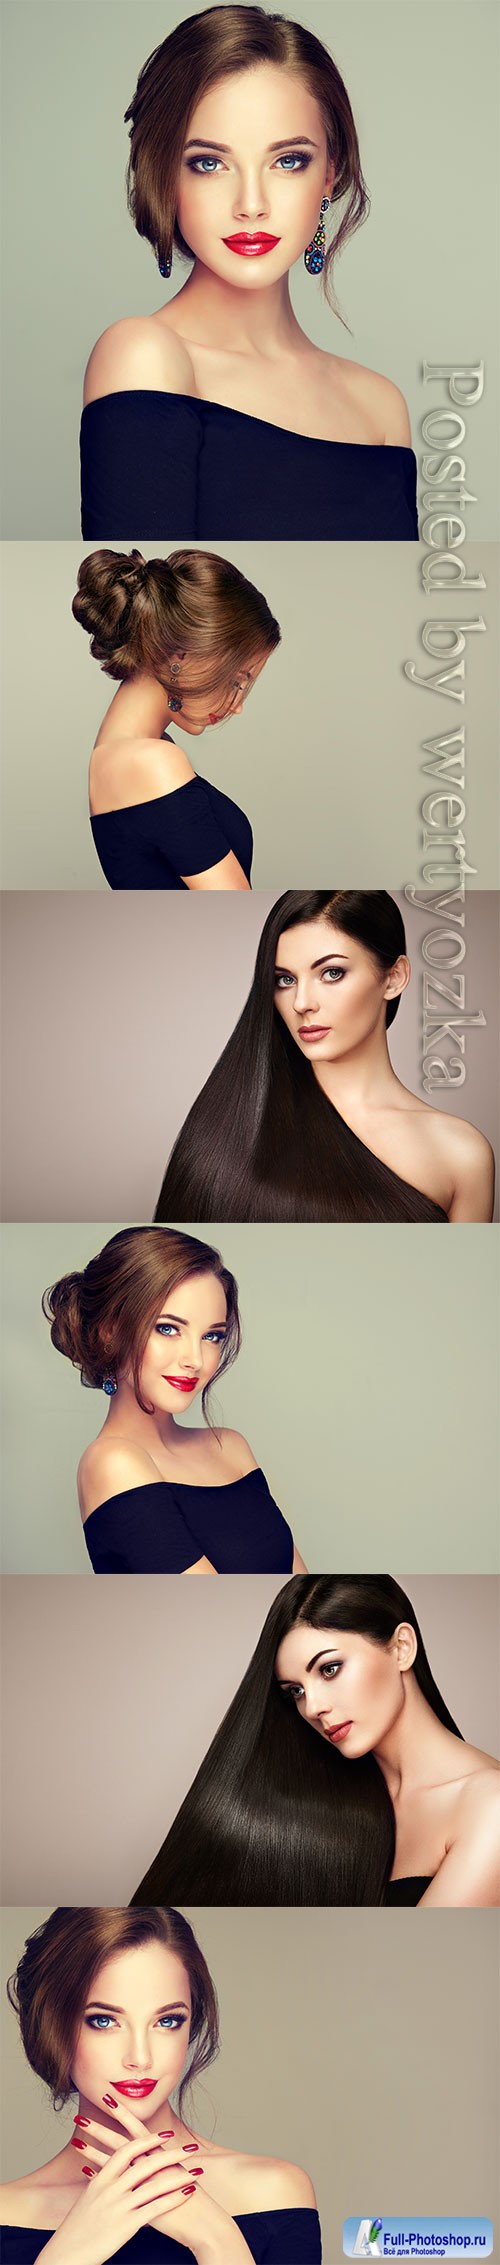 Luxurious girls with beautiful hairstyles and makeup stock photo